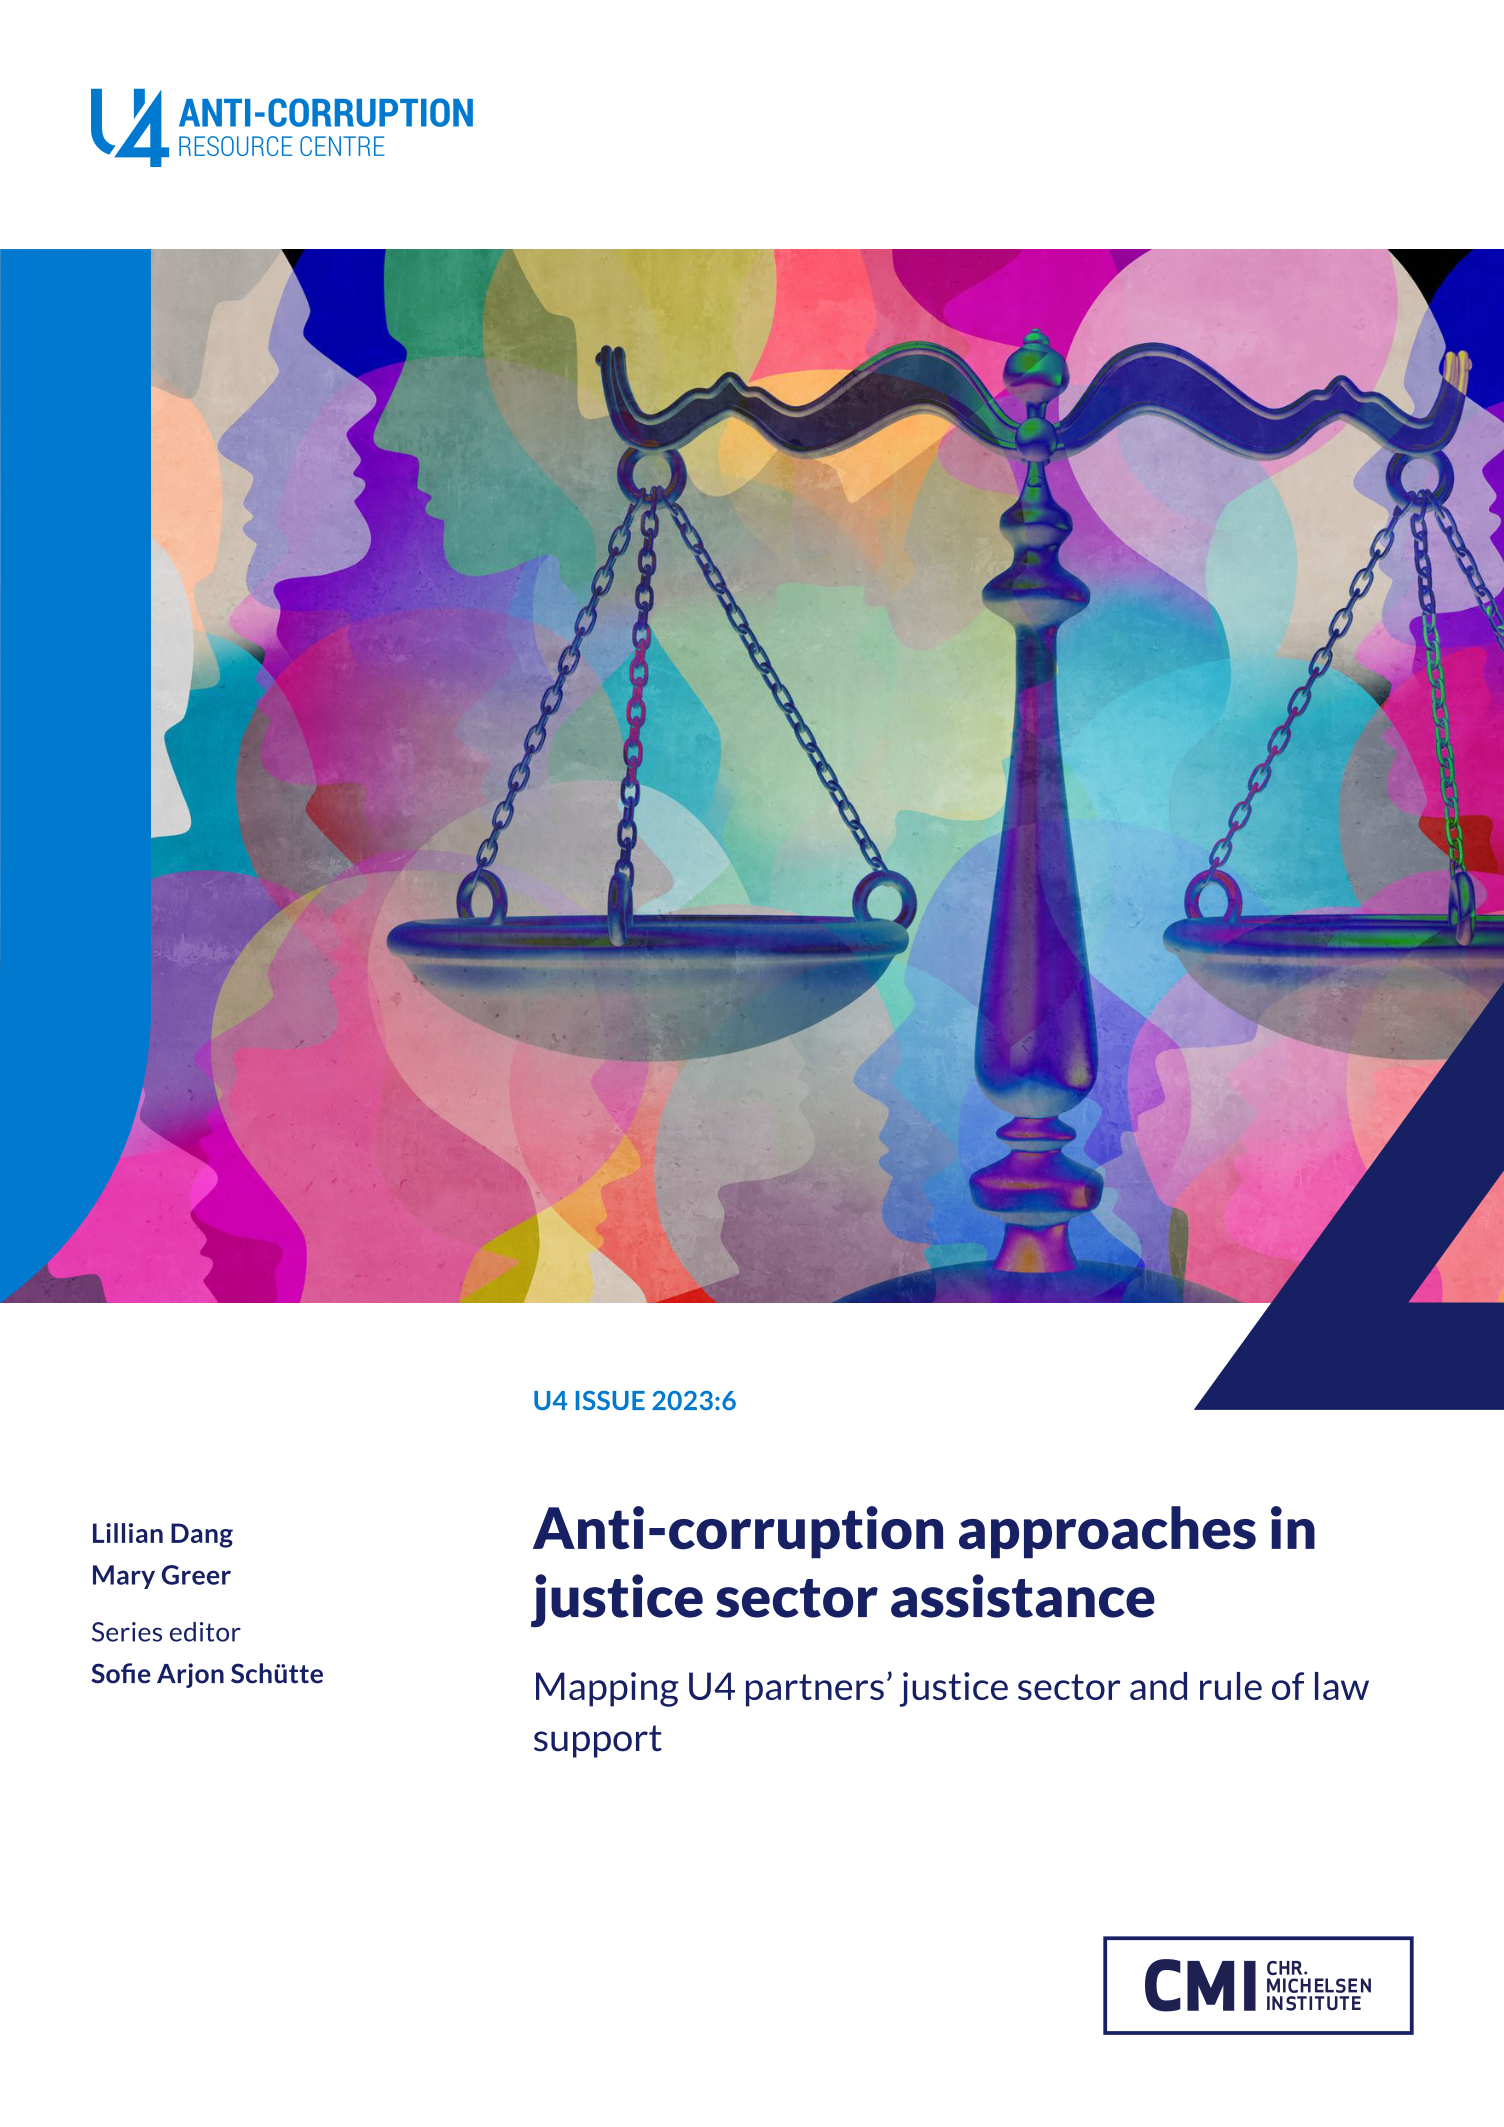 Anti-corruption approaches in justice sector assistance